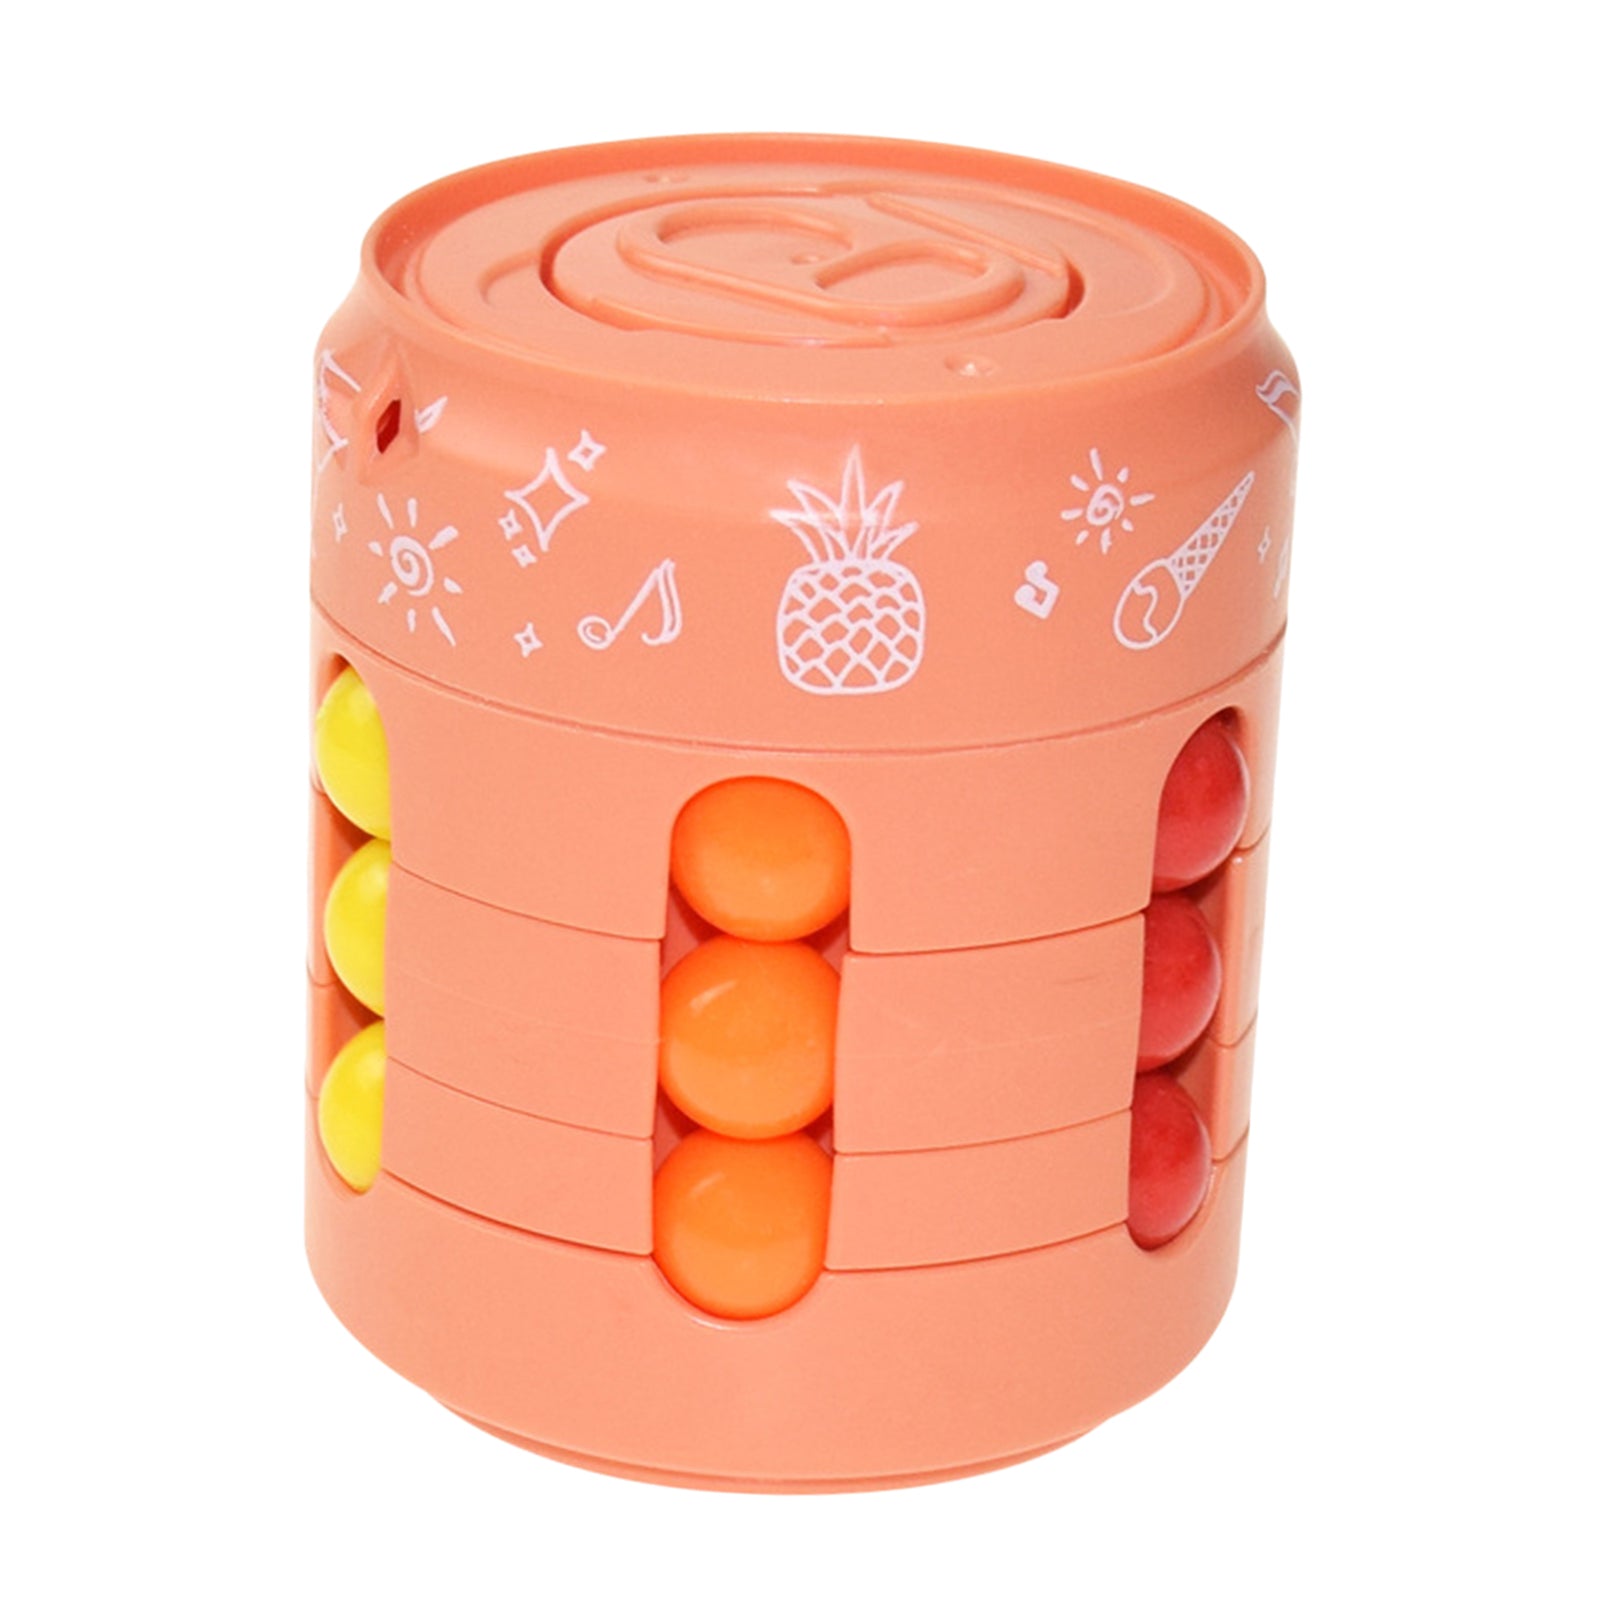 Kids Educational Toys Cube Twist Puzzle Game Hand Spinner Finger Gyro Orange